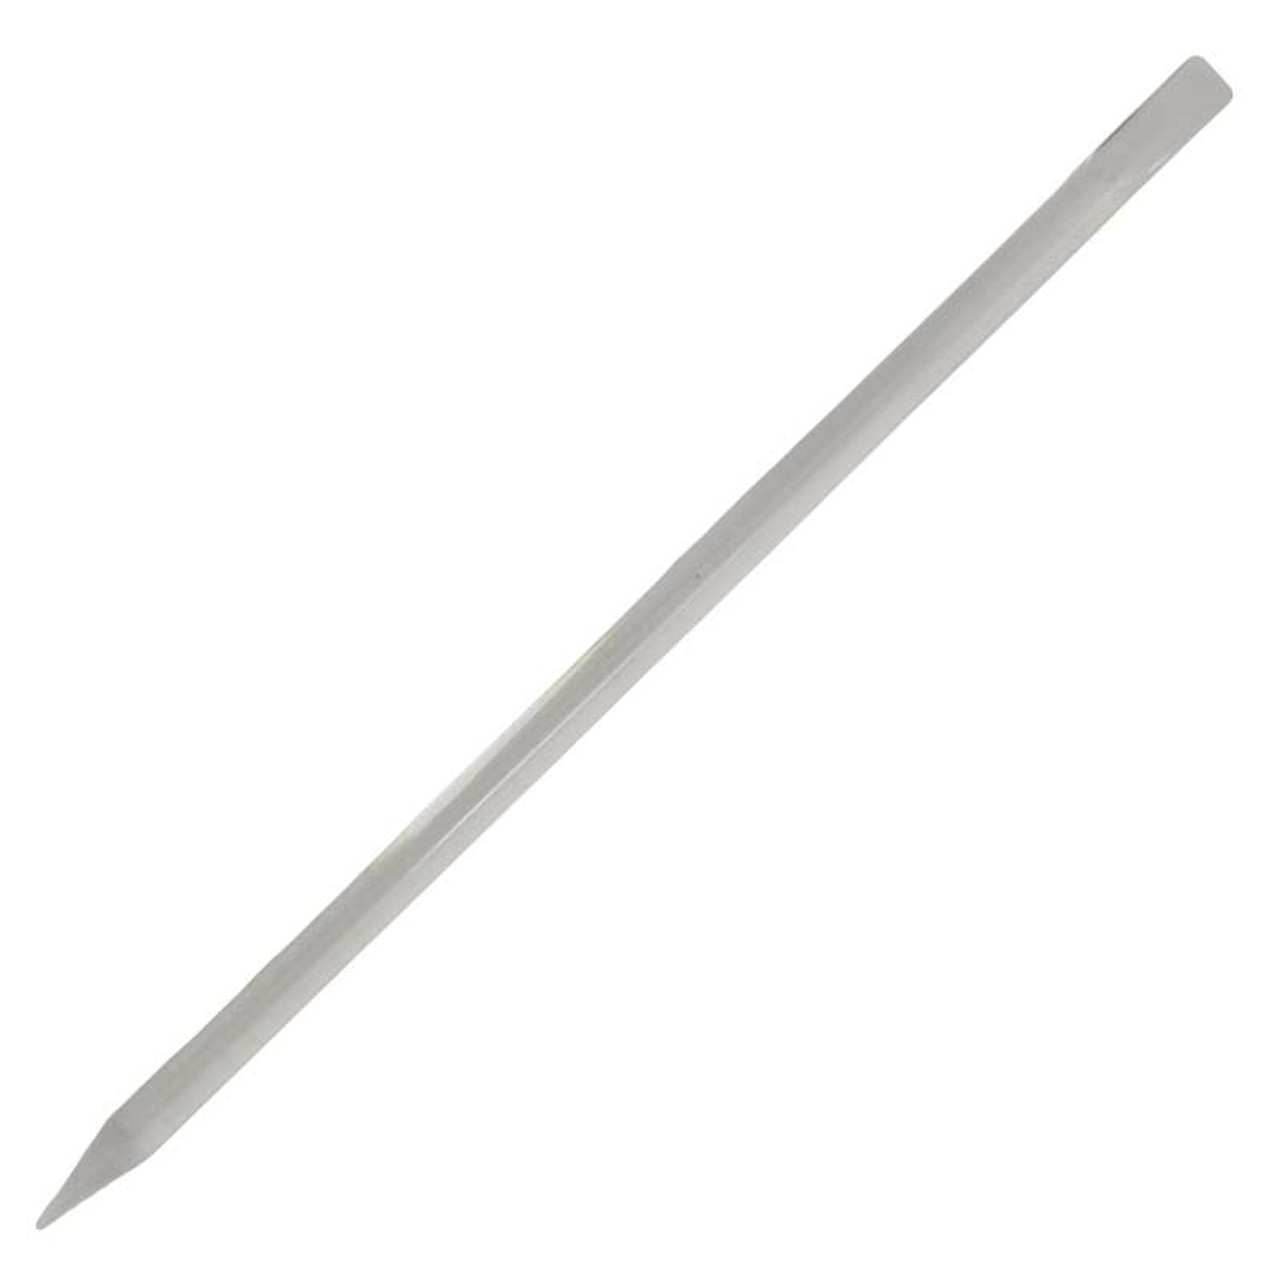 Transparent Polystyrene Stick with Beveled/ Pointed Ends 5206-80